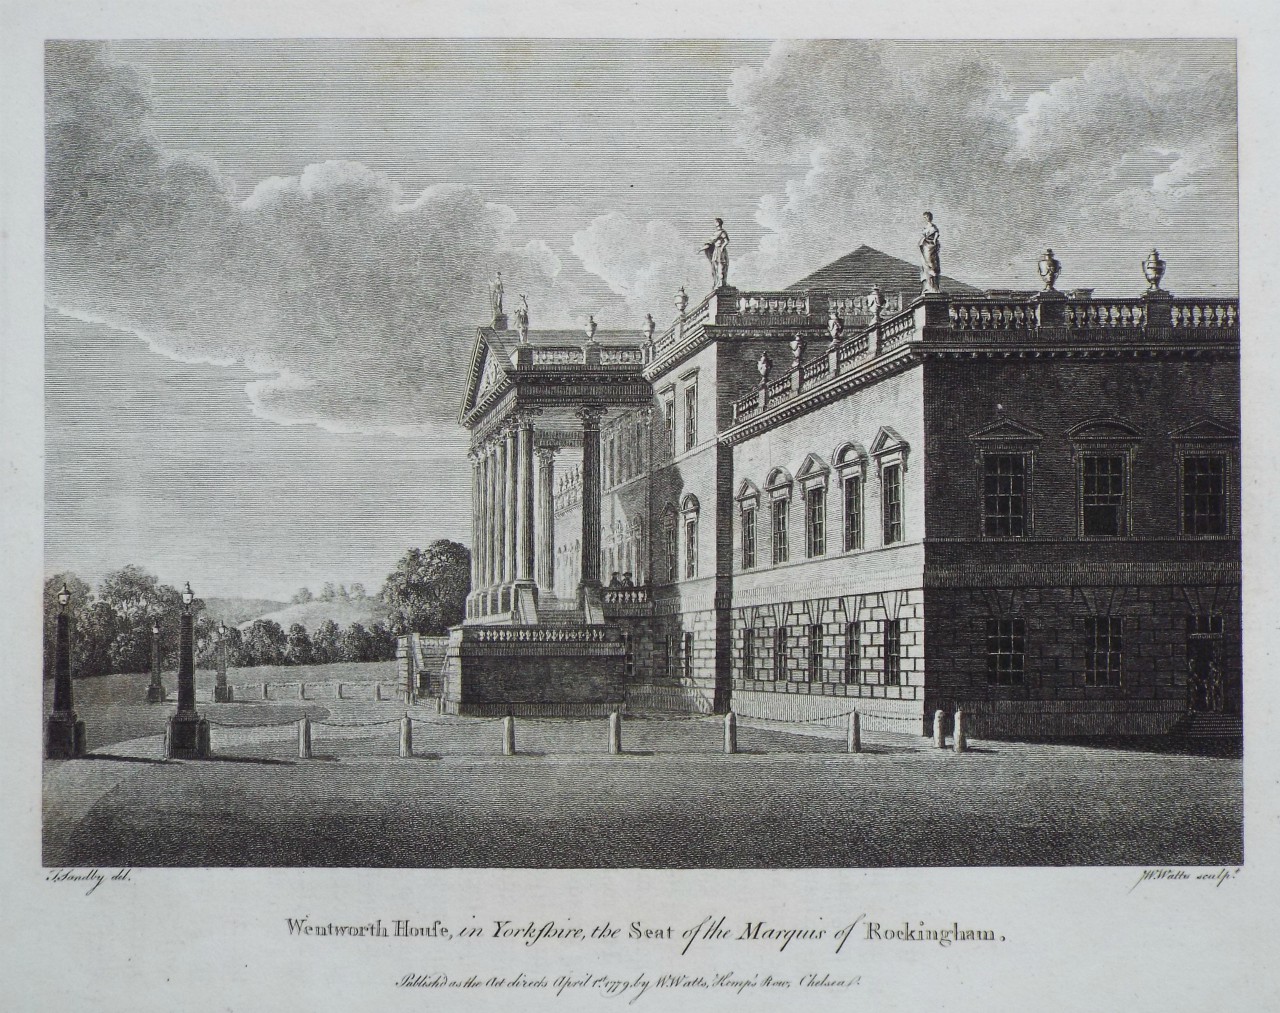 Print - Wentworth House, in Yorkshire, the Seat of the Marquis of Rockingham - Watts